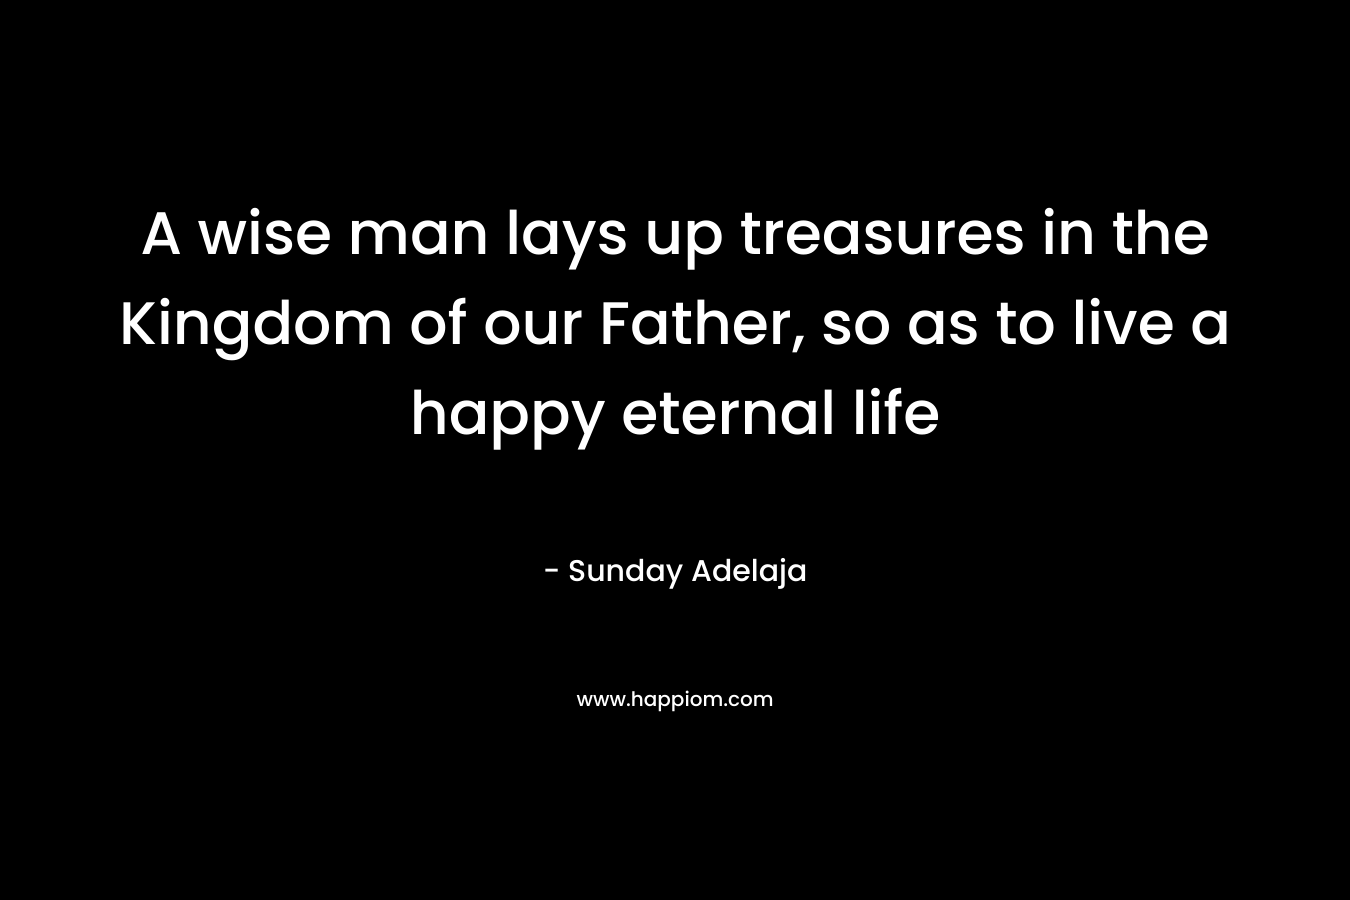 A wise man lays up treasures in the Kingdom of our Father, so as to live a happy eternal life – Sunday Adelaja